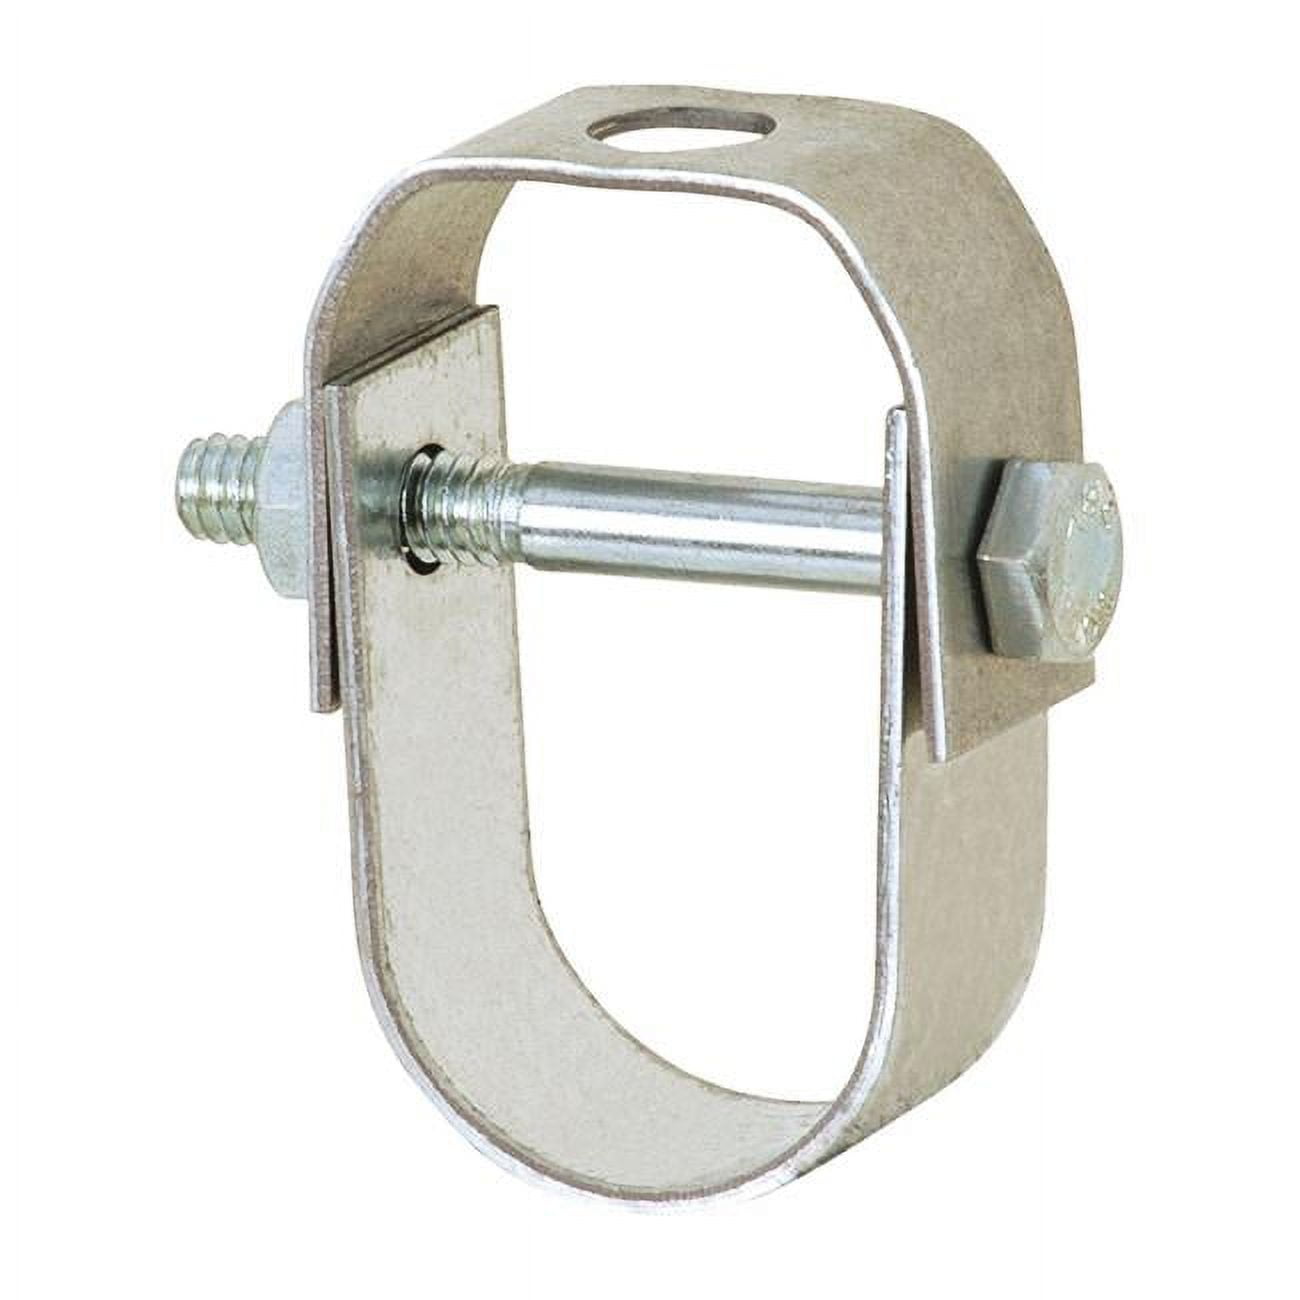 Sioux Chief 4905196 0.75 In. Galvanized Clevis Hanger - Pack Of 10